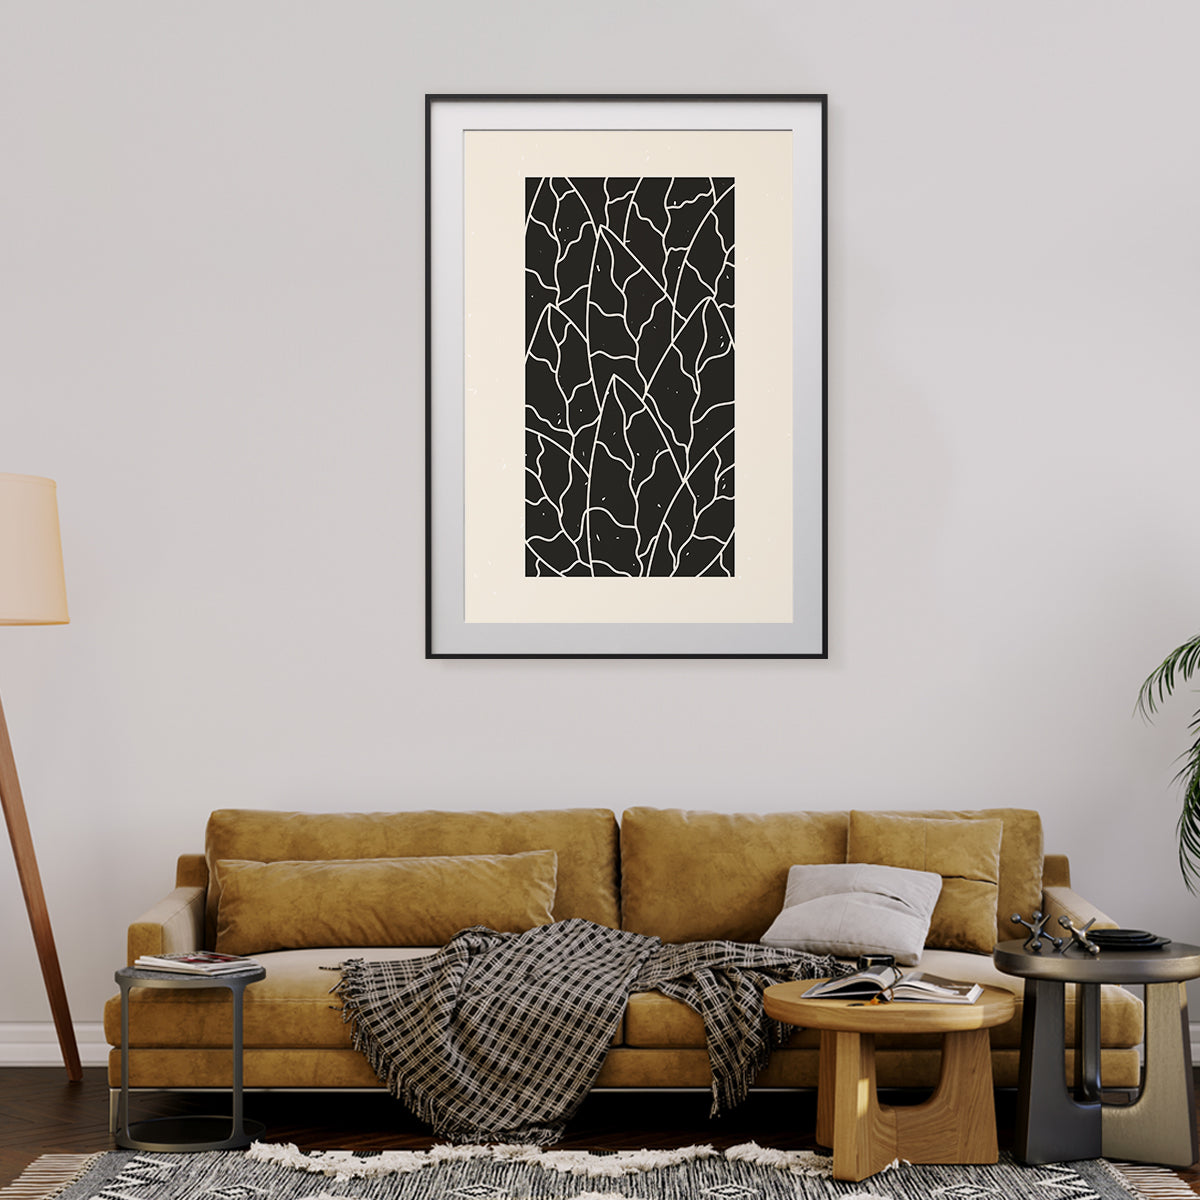 Abstract Black Leaves Vintage Poster Wall Art For Room Decor-Vertical Posters NOT FRAMED-CetArt-8″x10″ inches-CetArt